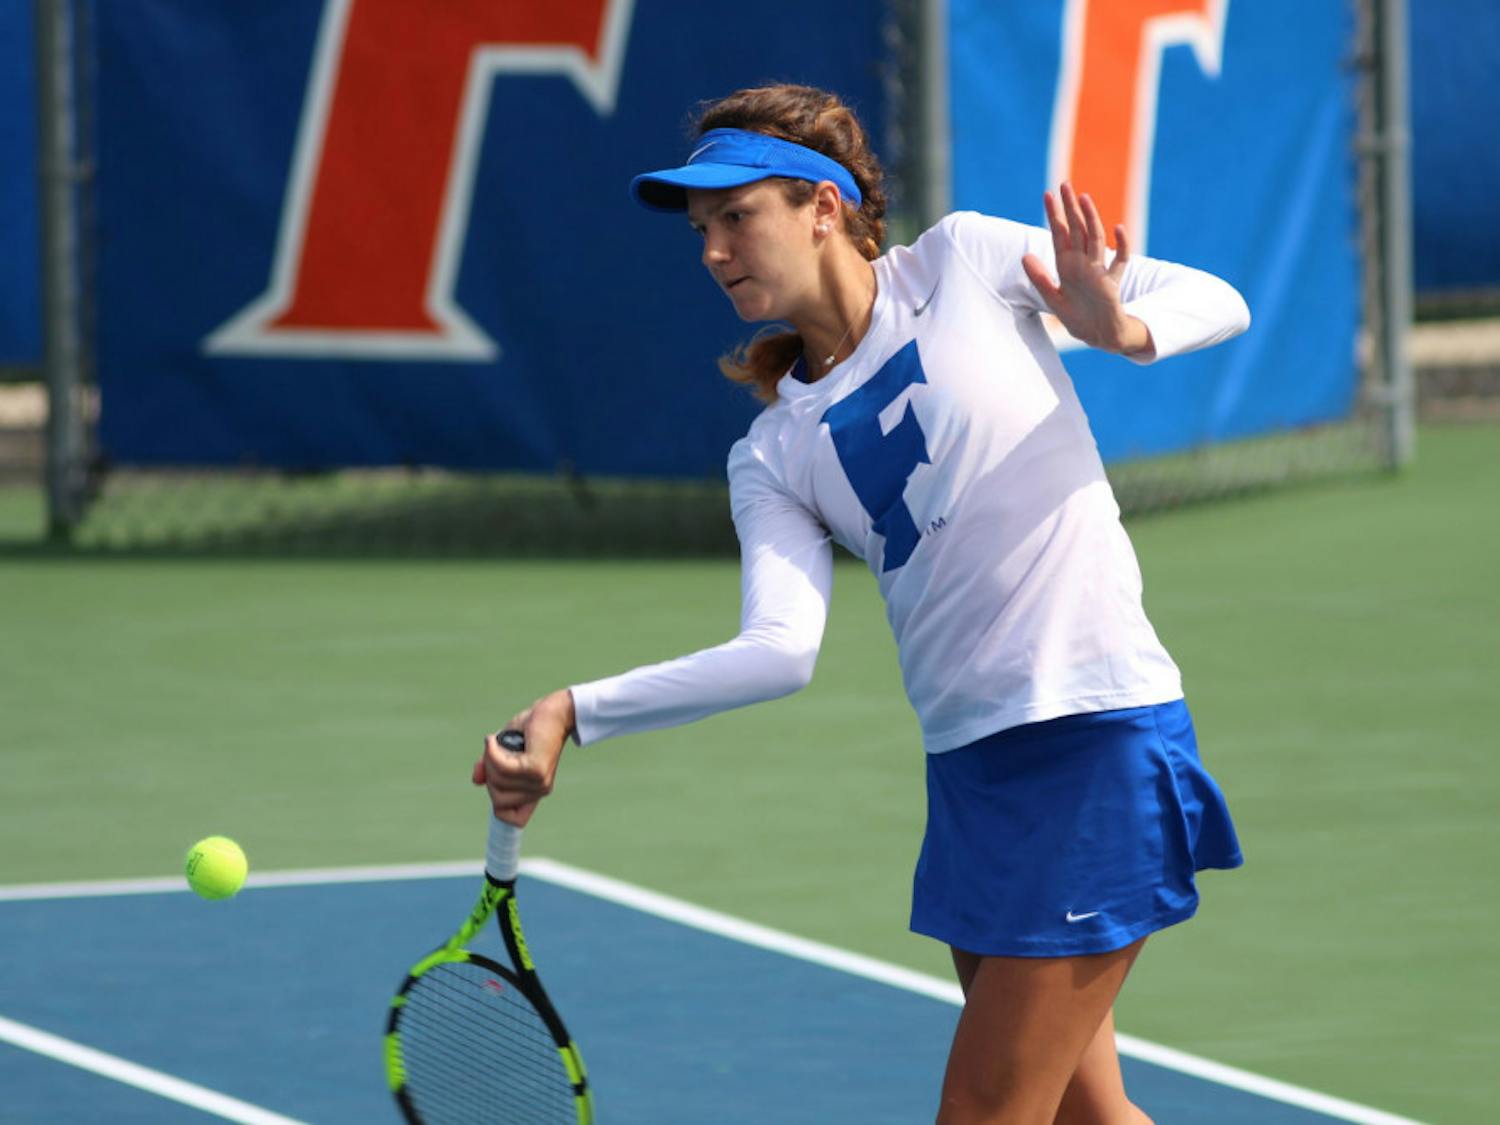 Senior Anna Danilina is the only Gators women's tennis player left in the NCAA Division I Championships.